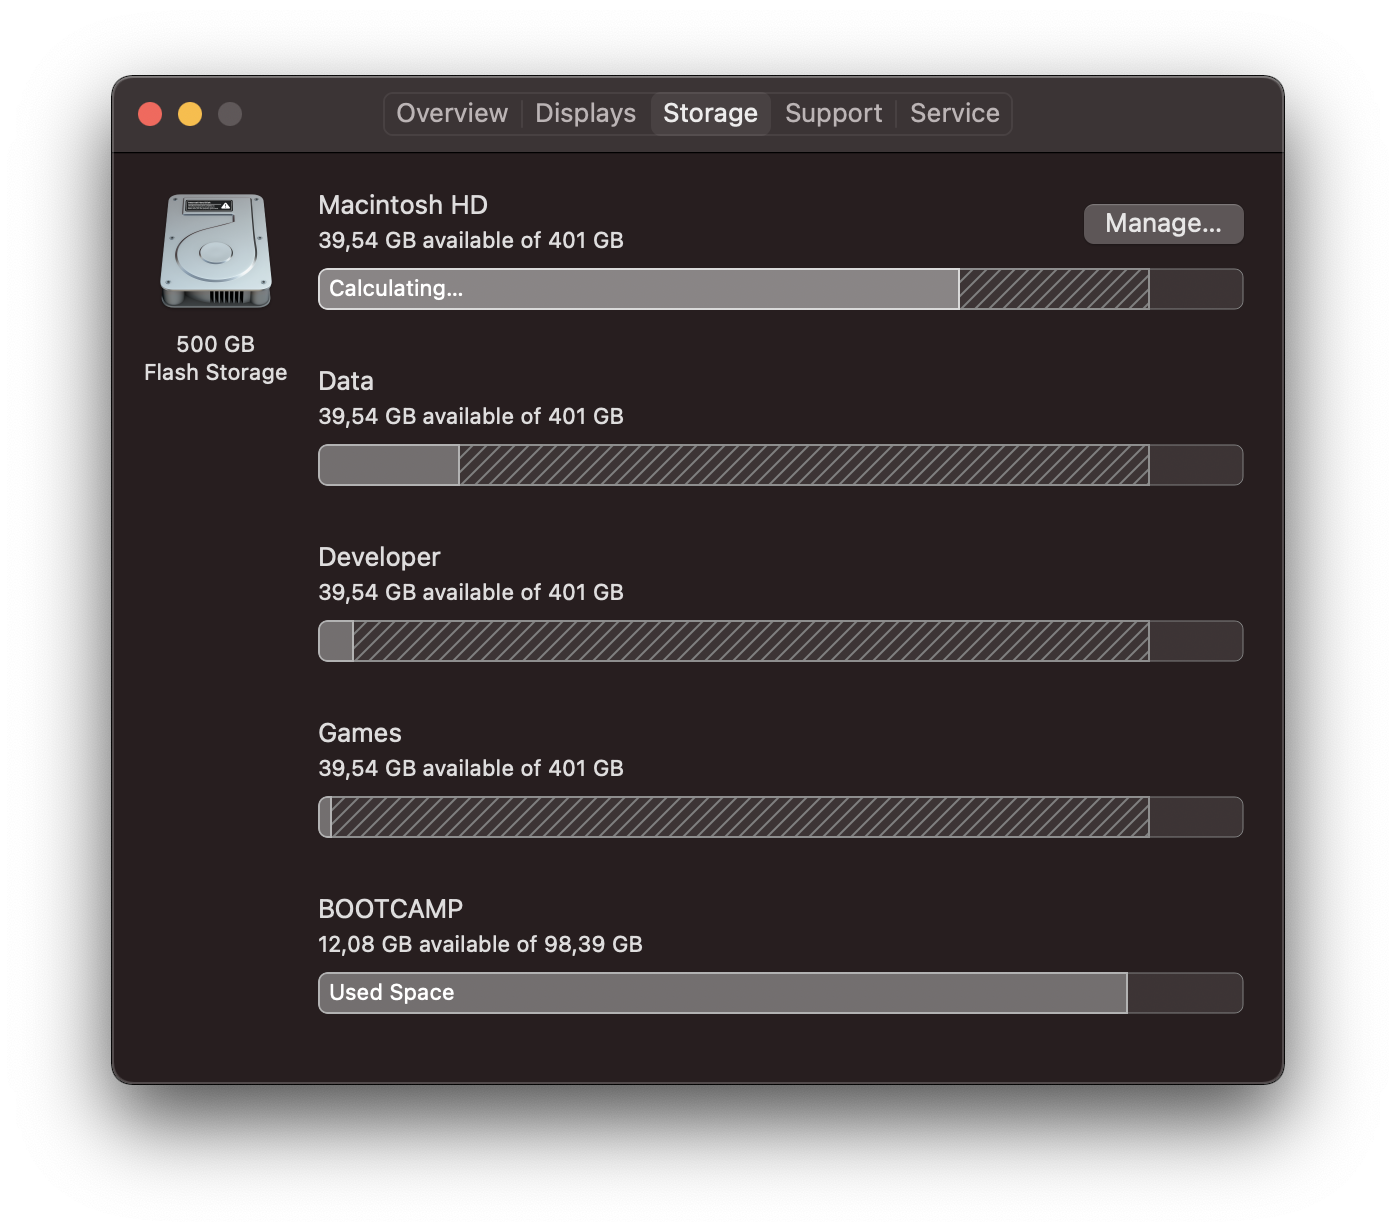 Multiple volumes allow me to easily reinstall macOS without loosing much data.